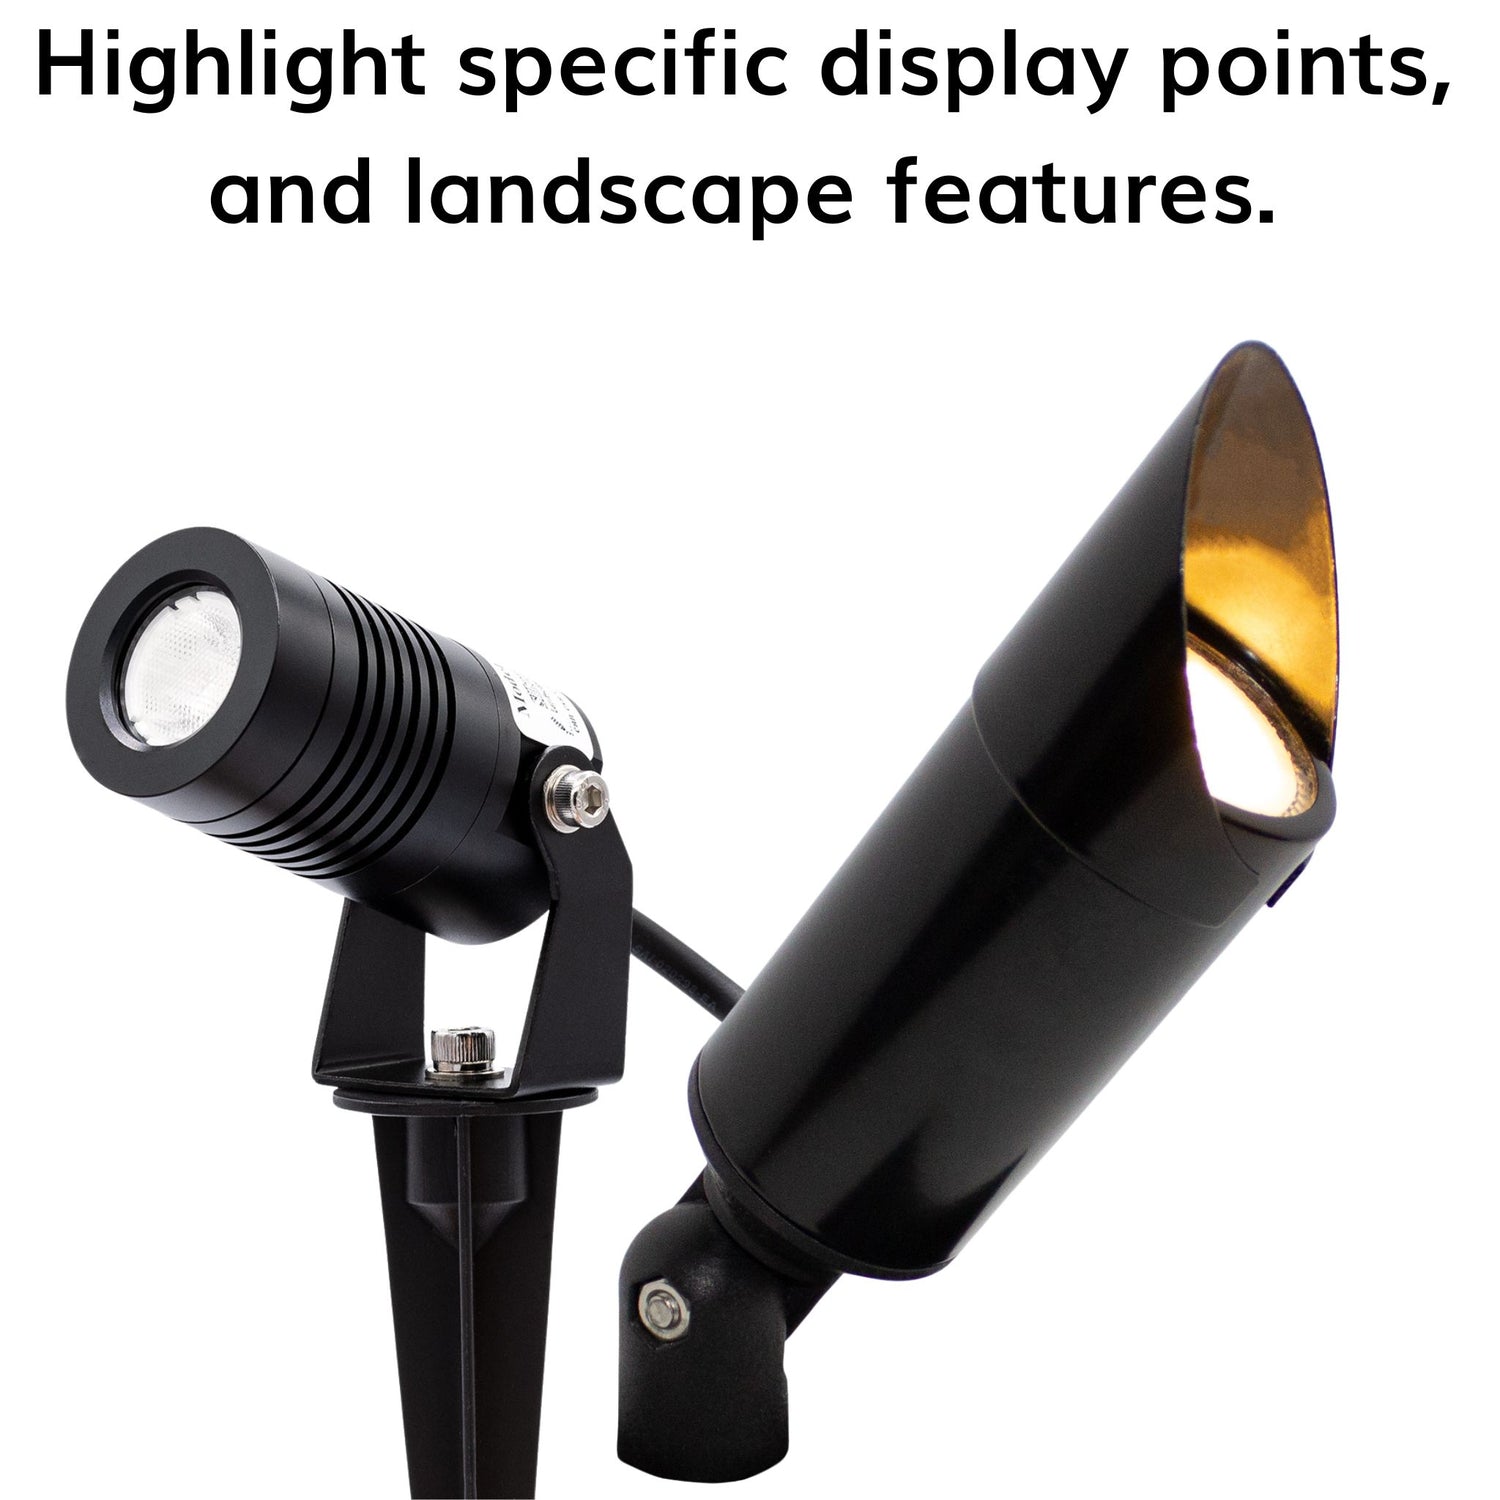 Highlight specific display points and landscape features with LED Spot Lights.